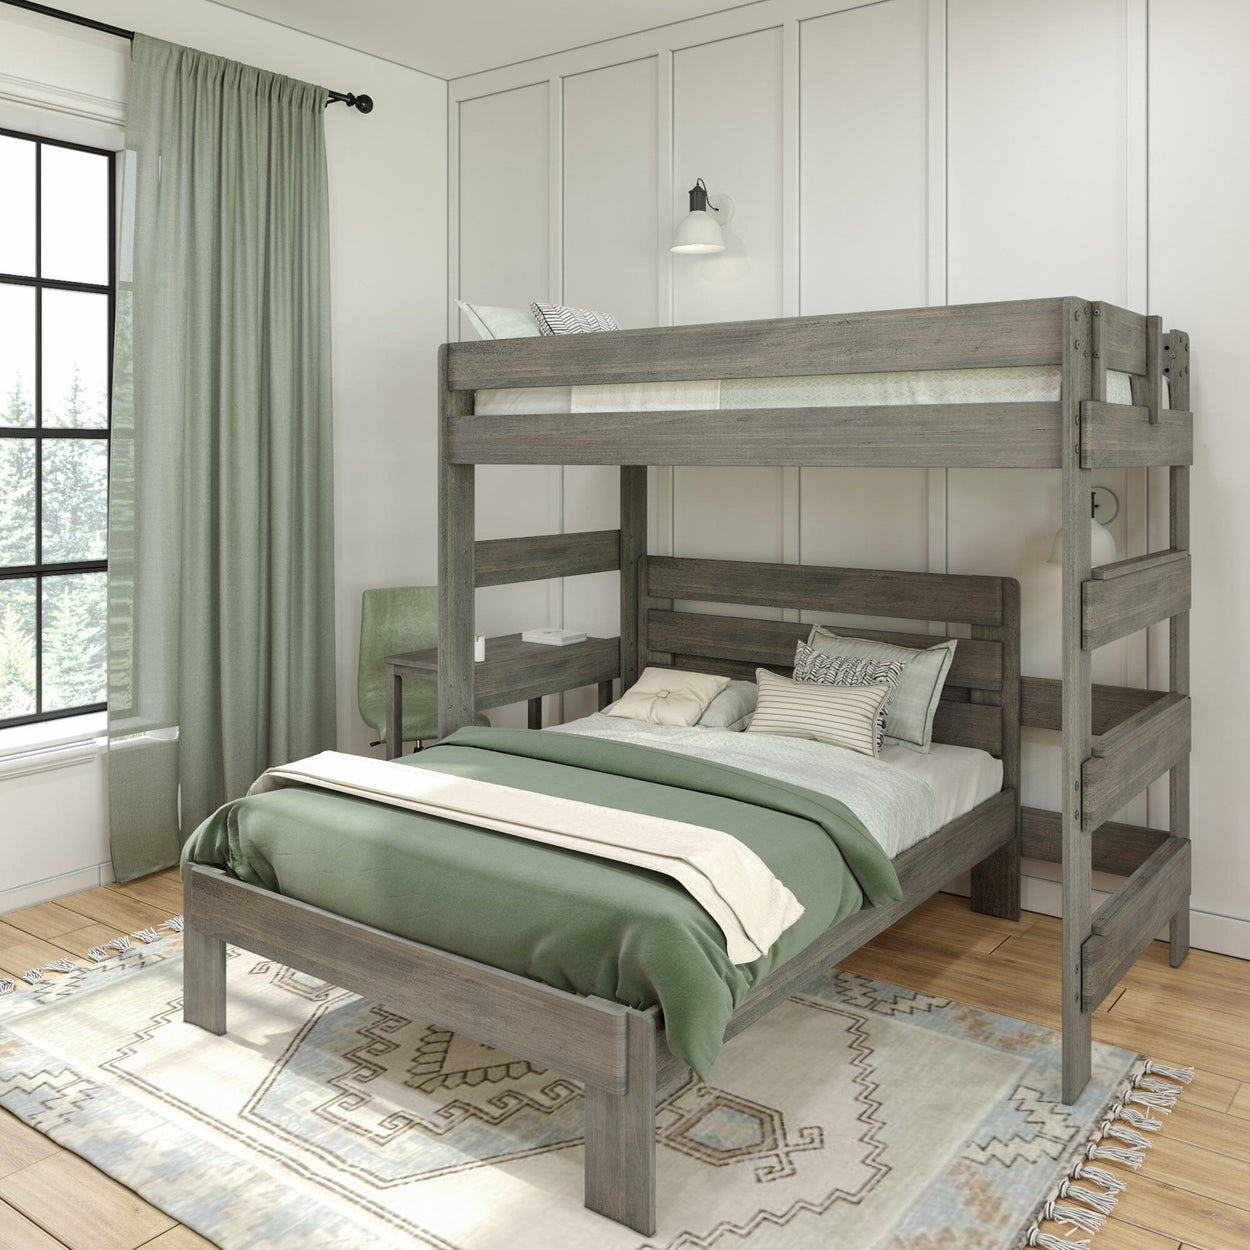 19-802-185 : Bunk Beds Farmhouse Twin over Full L-Shaped Bunk Bed with Desk, Driftwood